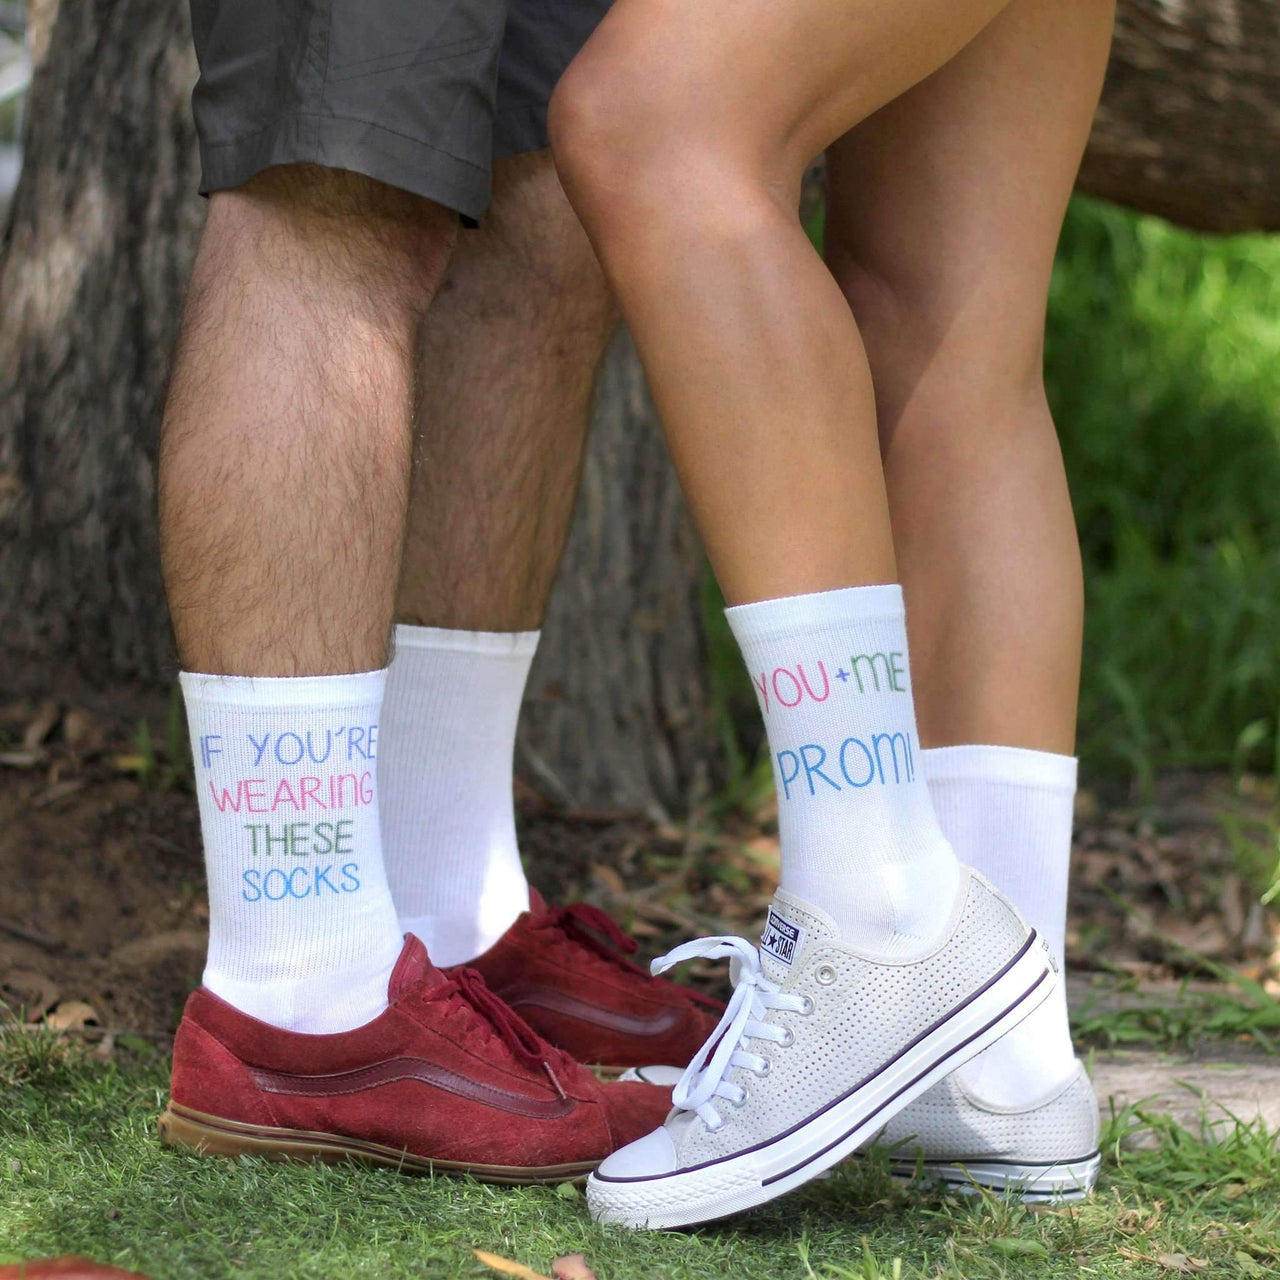 You and me equals prom custom printed on crew socks.